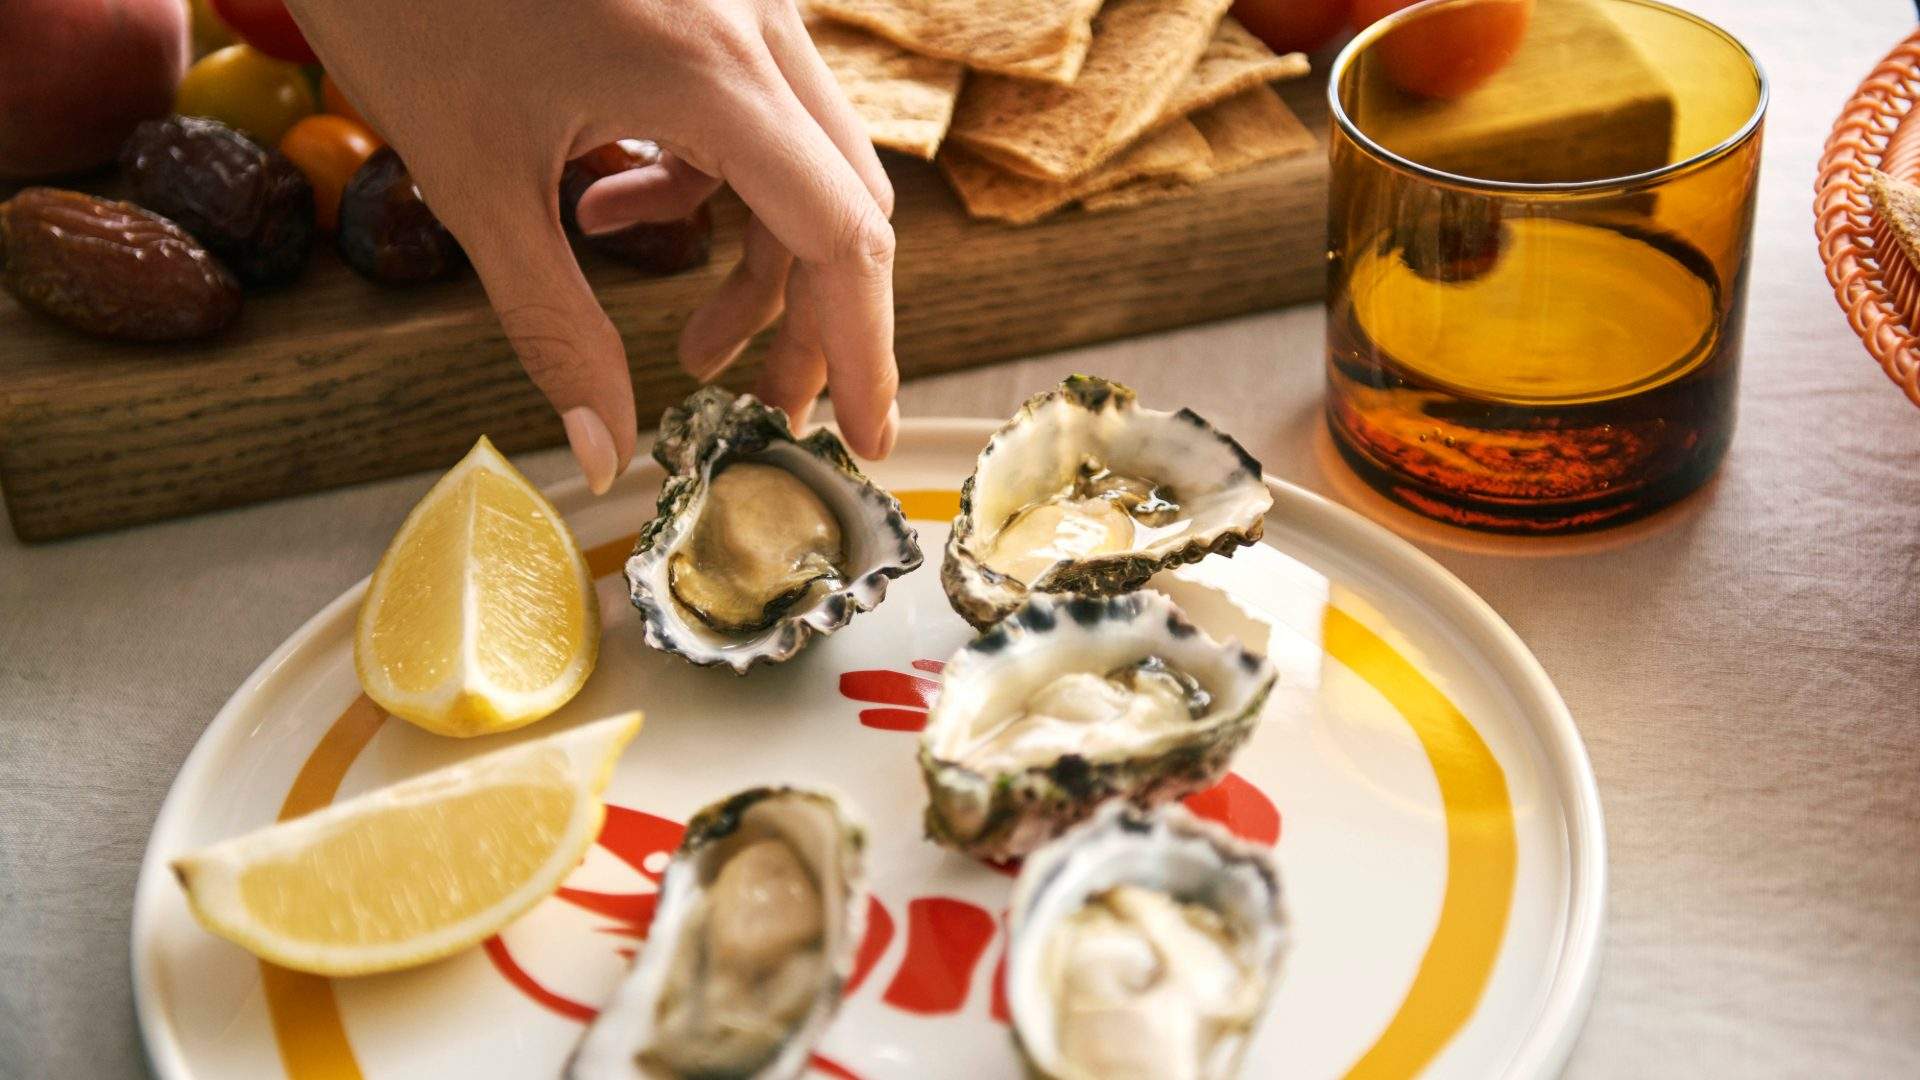 East 33 Is Brisbane's New Home-Delivery Service Dropping A-Class Oysters to Your Doorstep